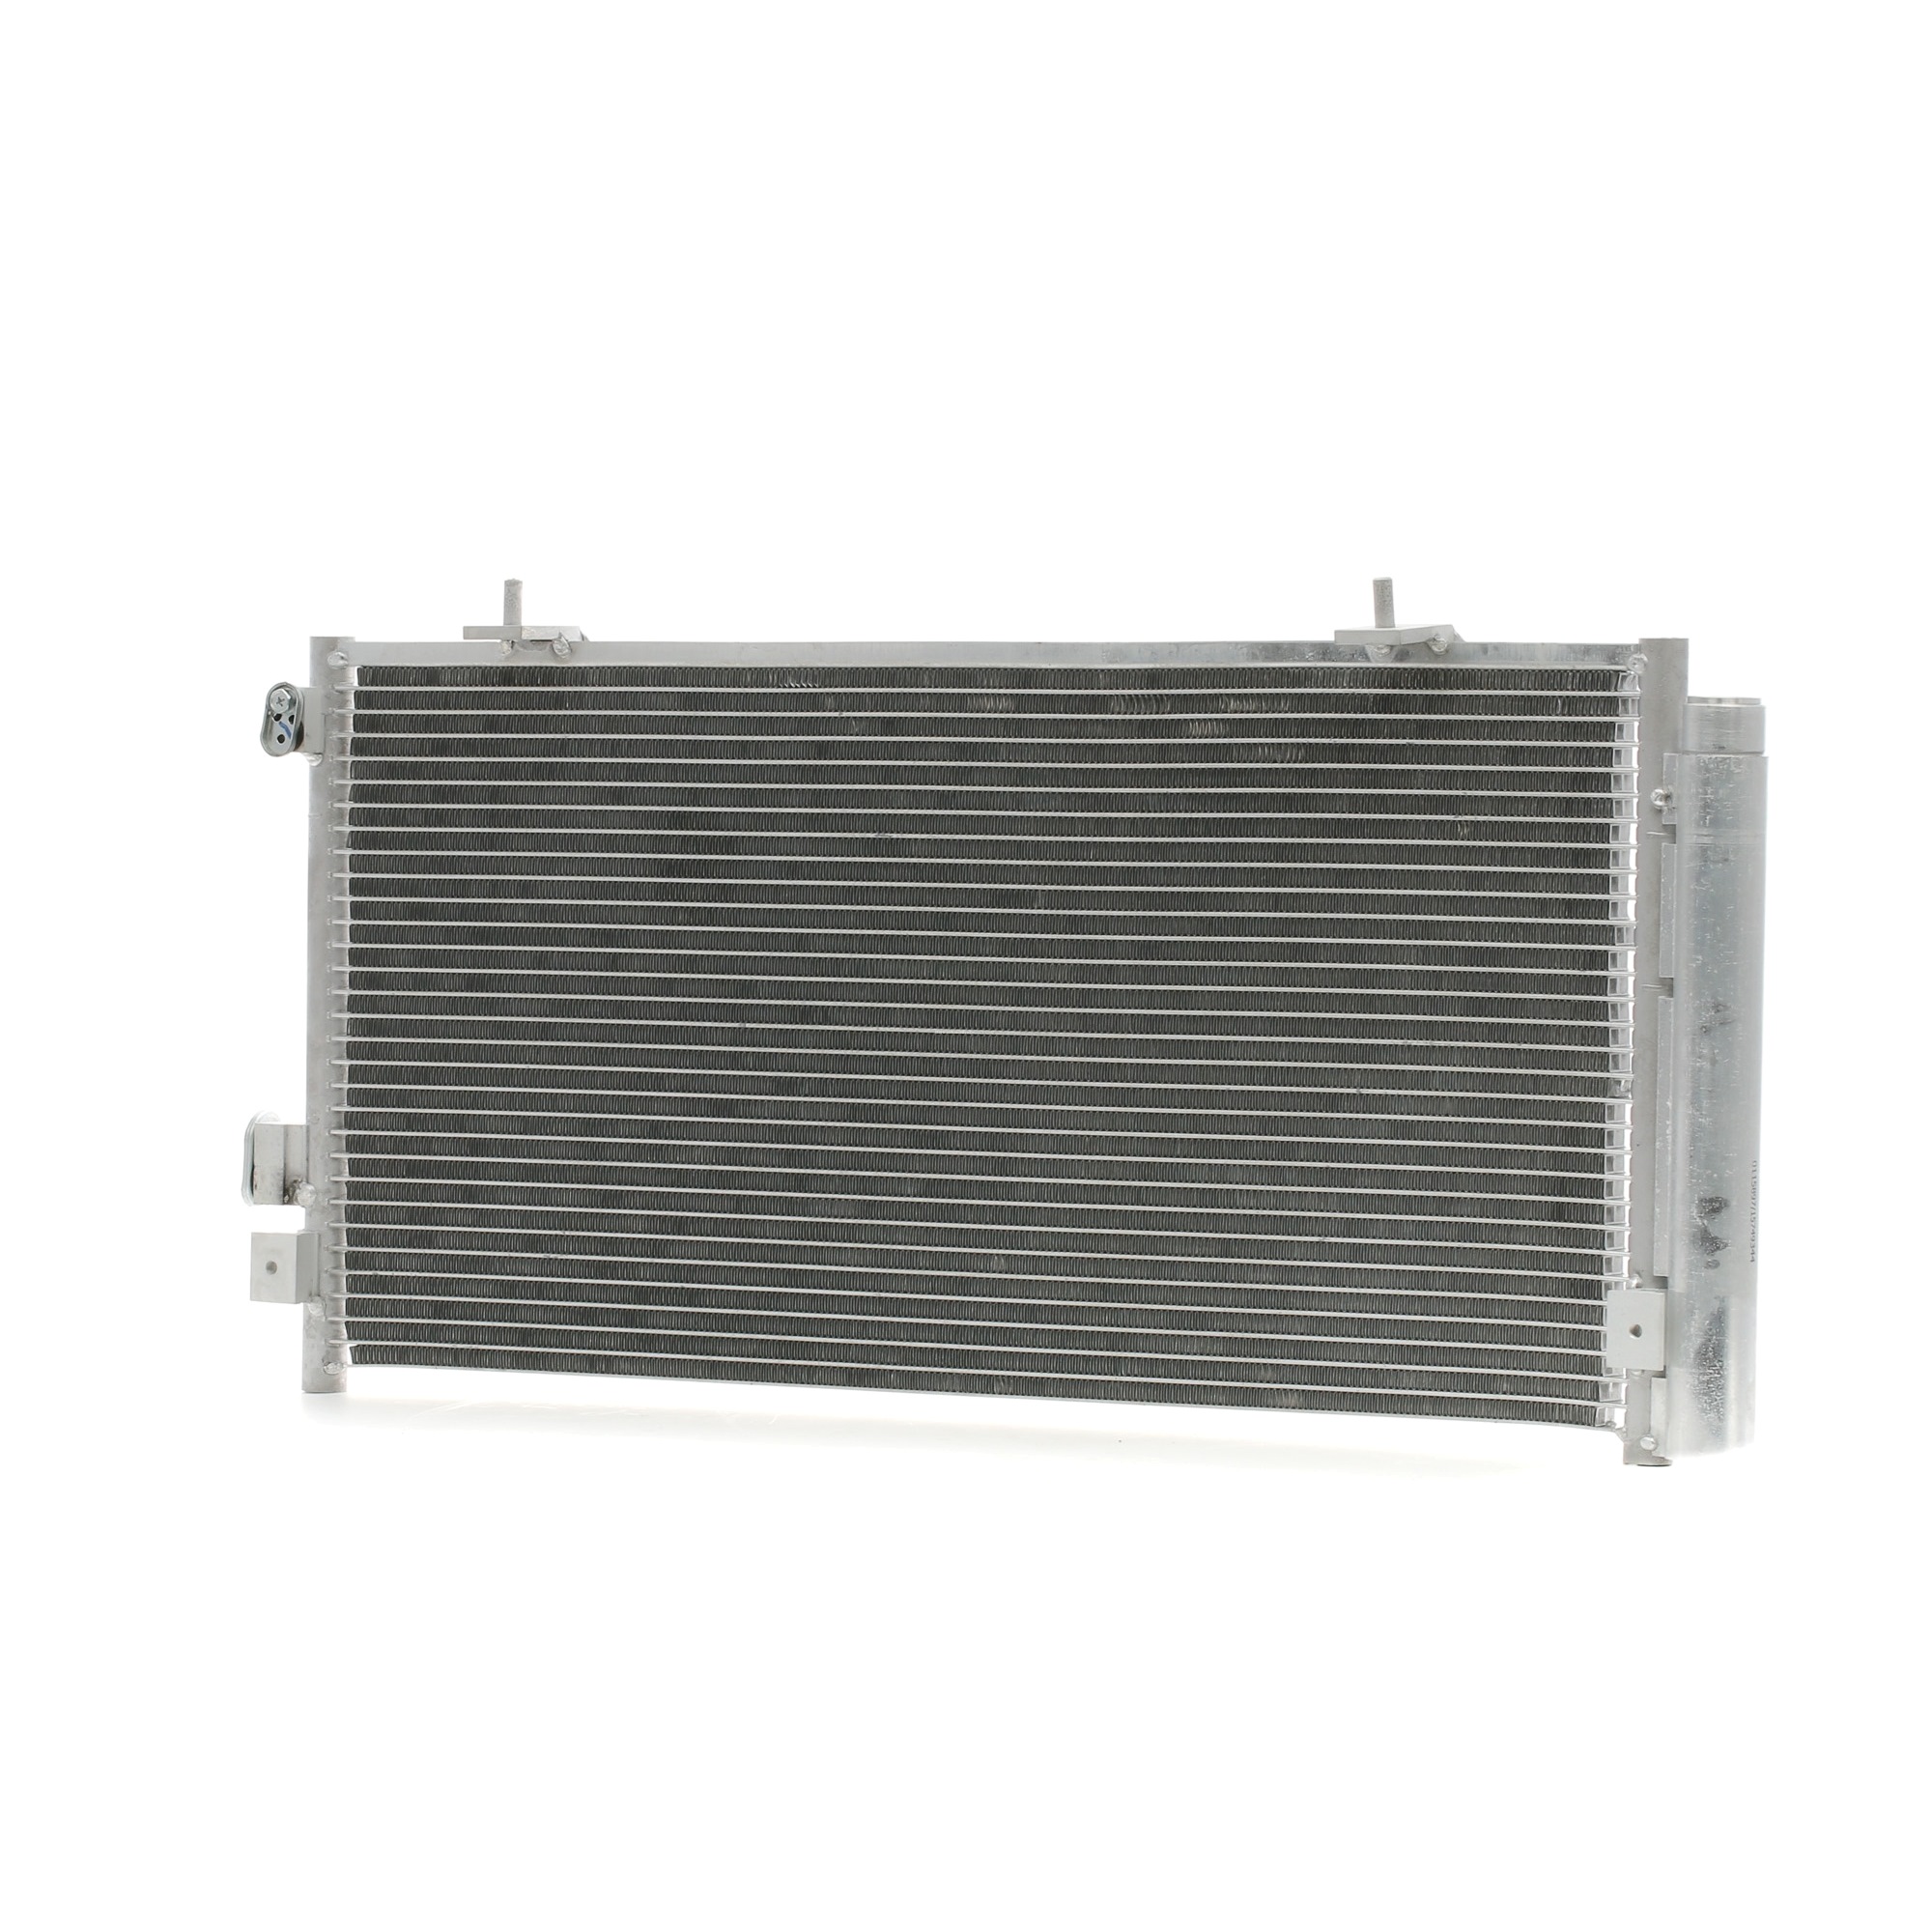 STARK SKCD-0110582 Air conditioning condenser with dryer, 620x300x16, 300mm, 620mm, 16mm